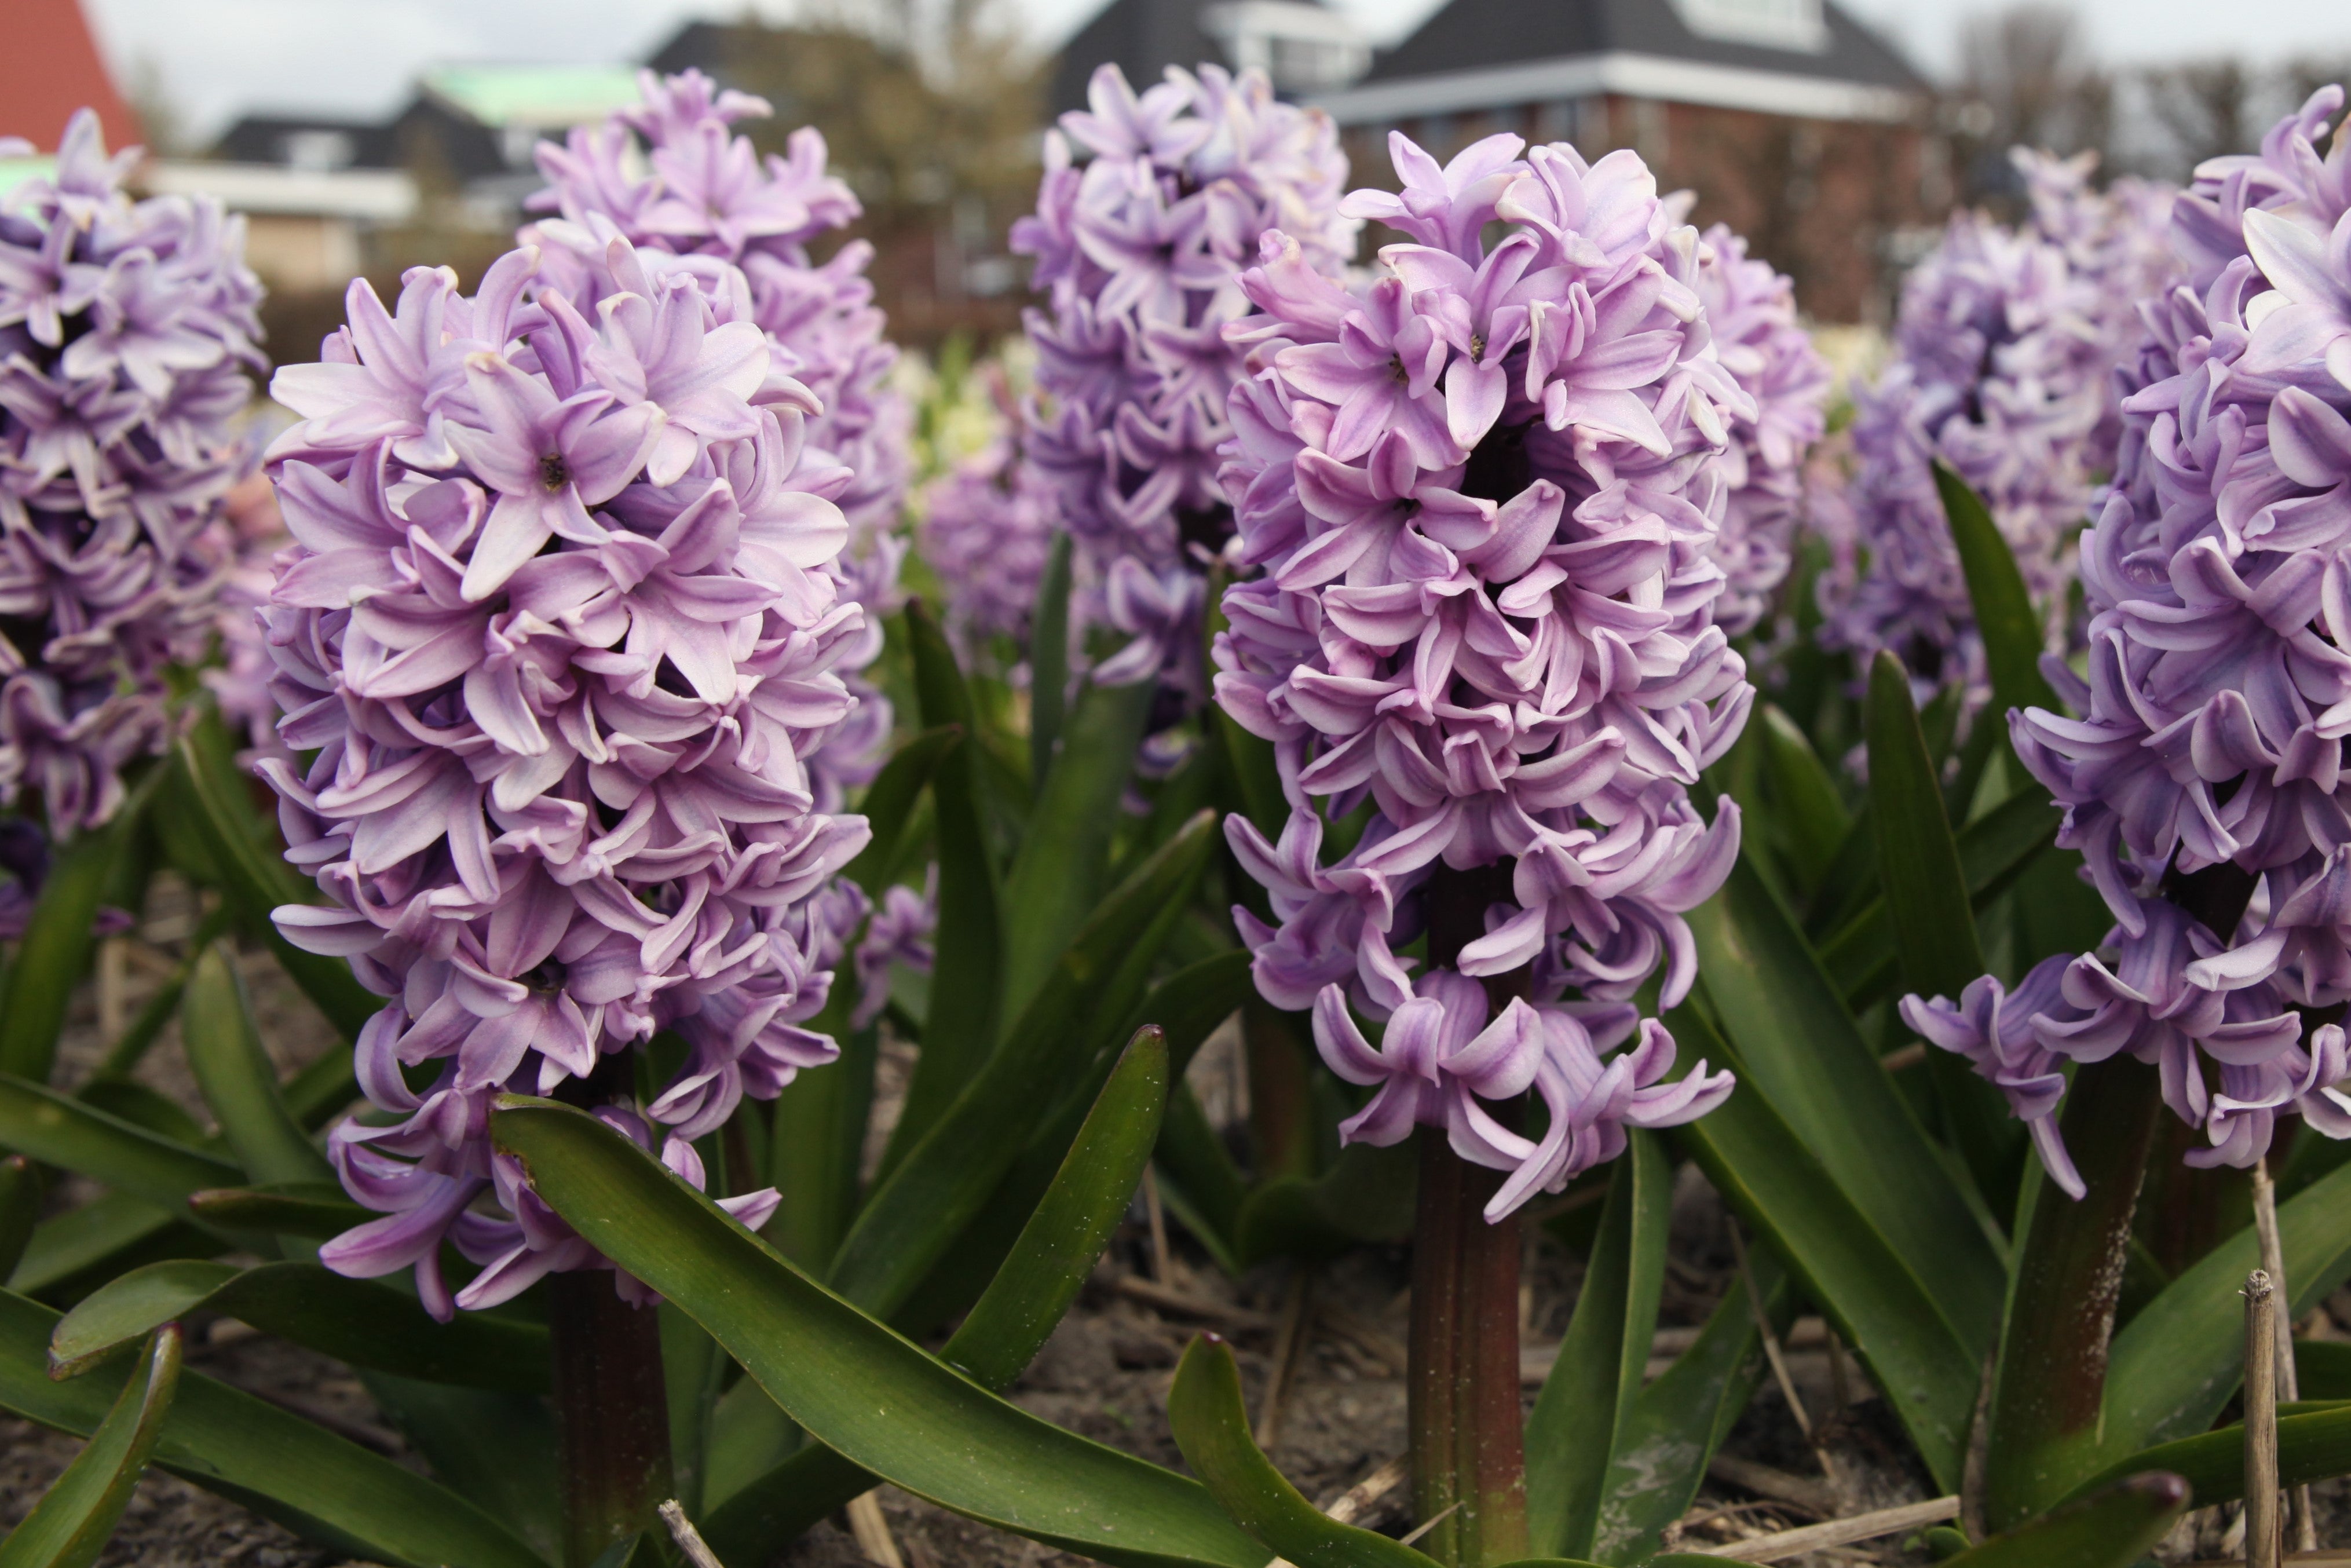 Group of Hyacinth Splendid Cornelia with violet small florets and green foliage